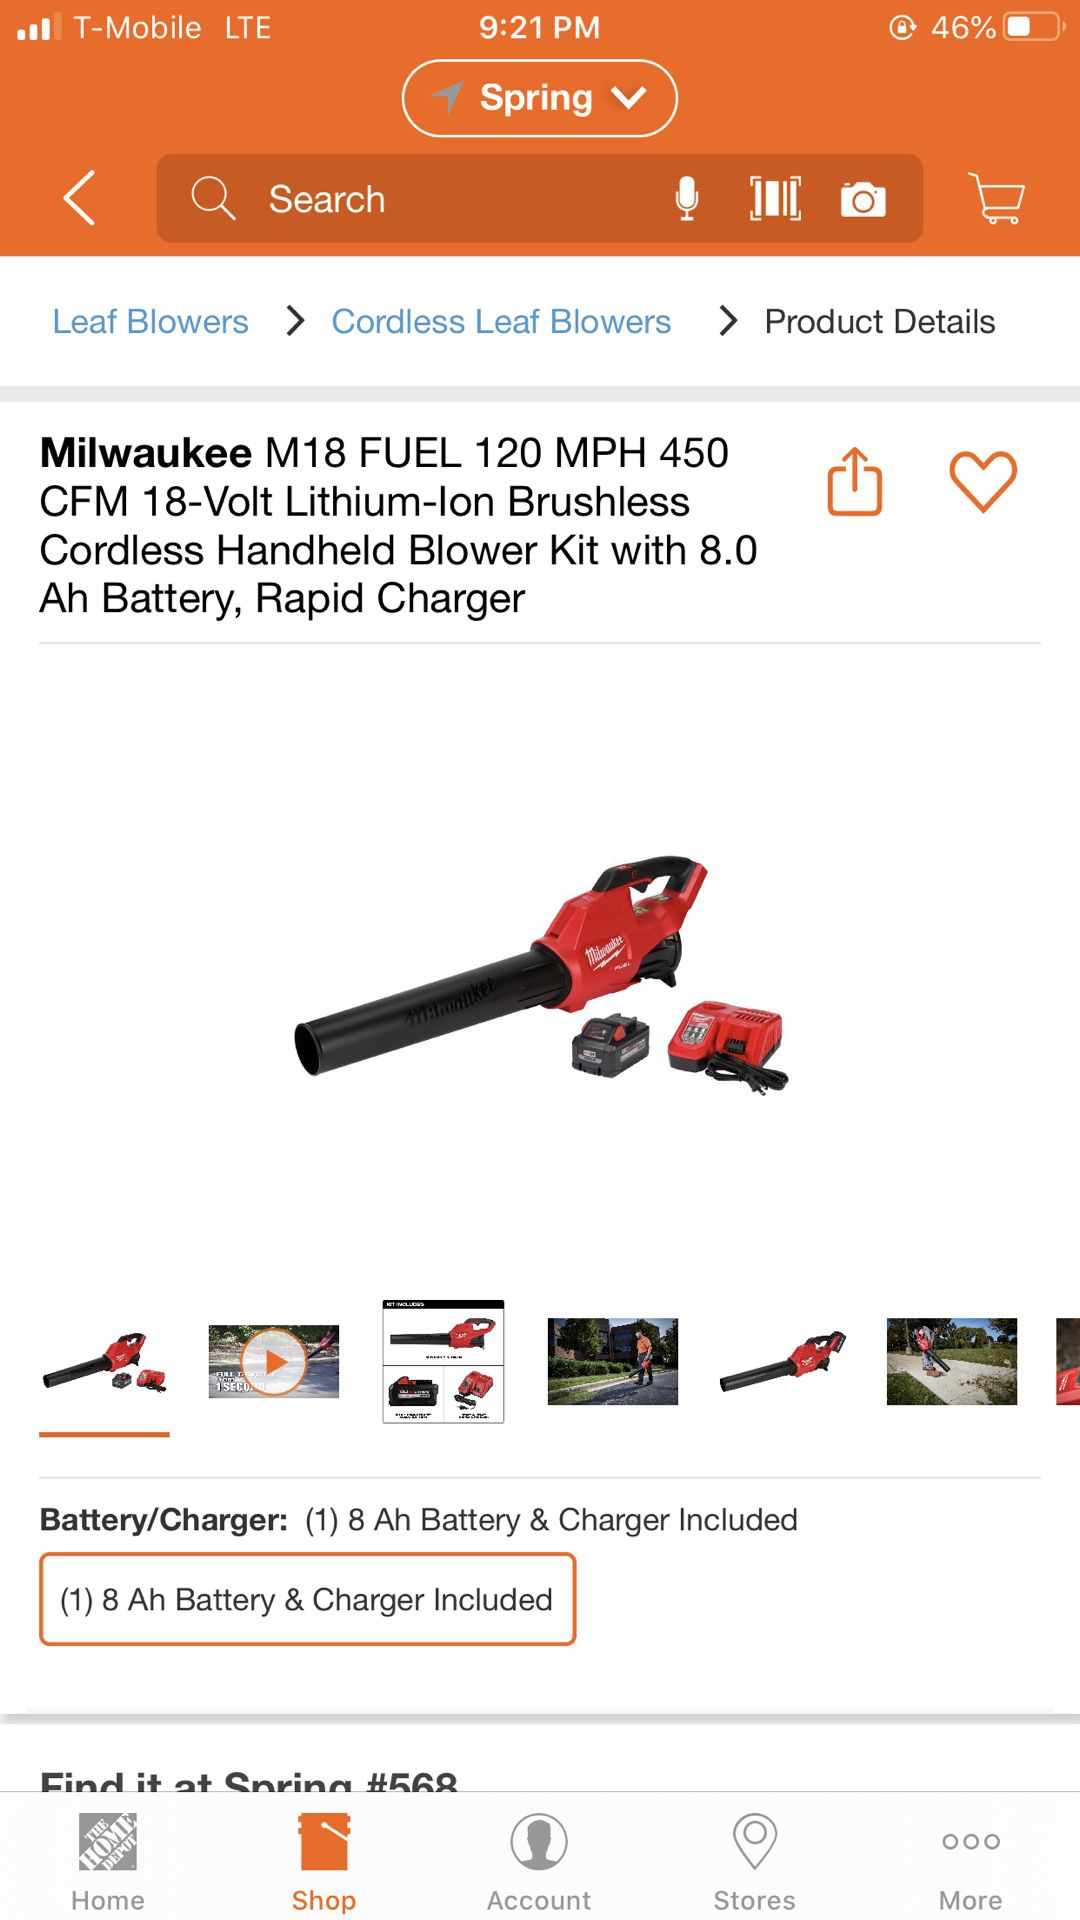 Milwaukee M18 FUEL Blower Kit with 8.0 battery